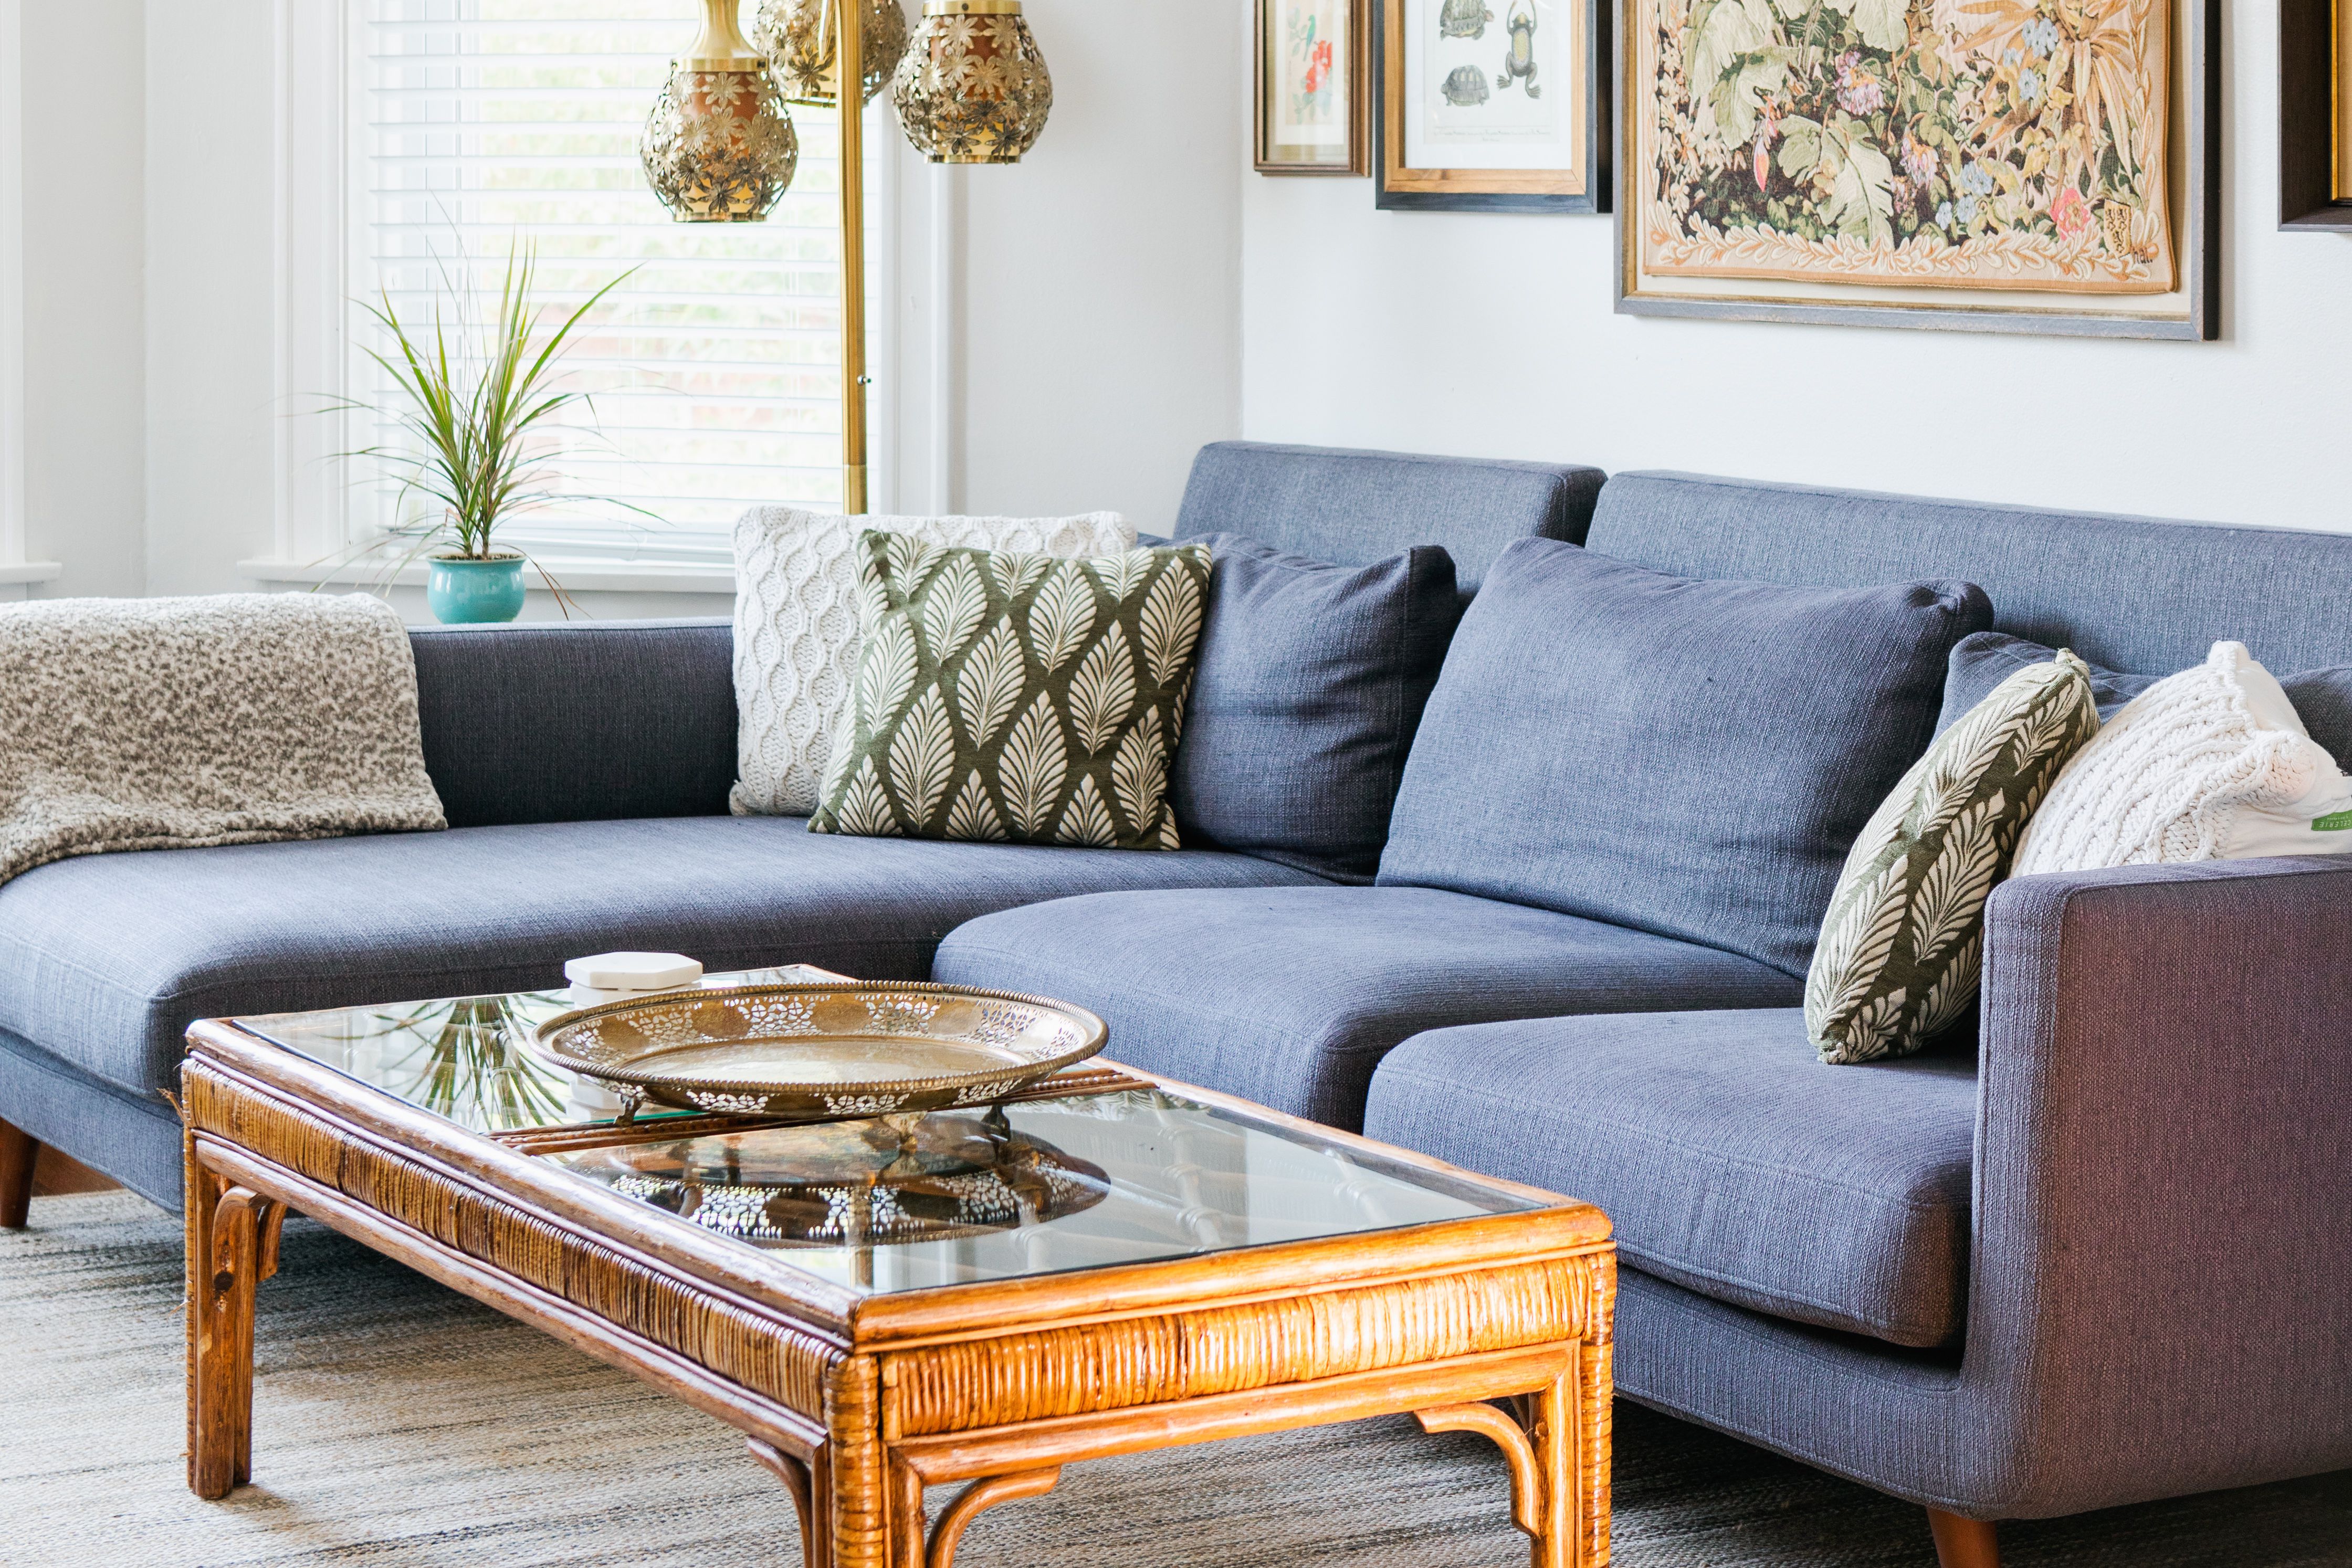 70s Decor Trends Are Back in Style